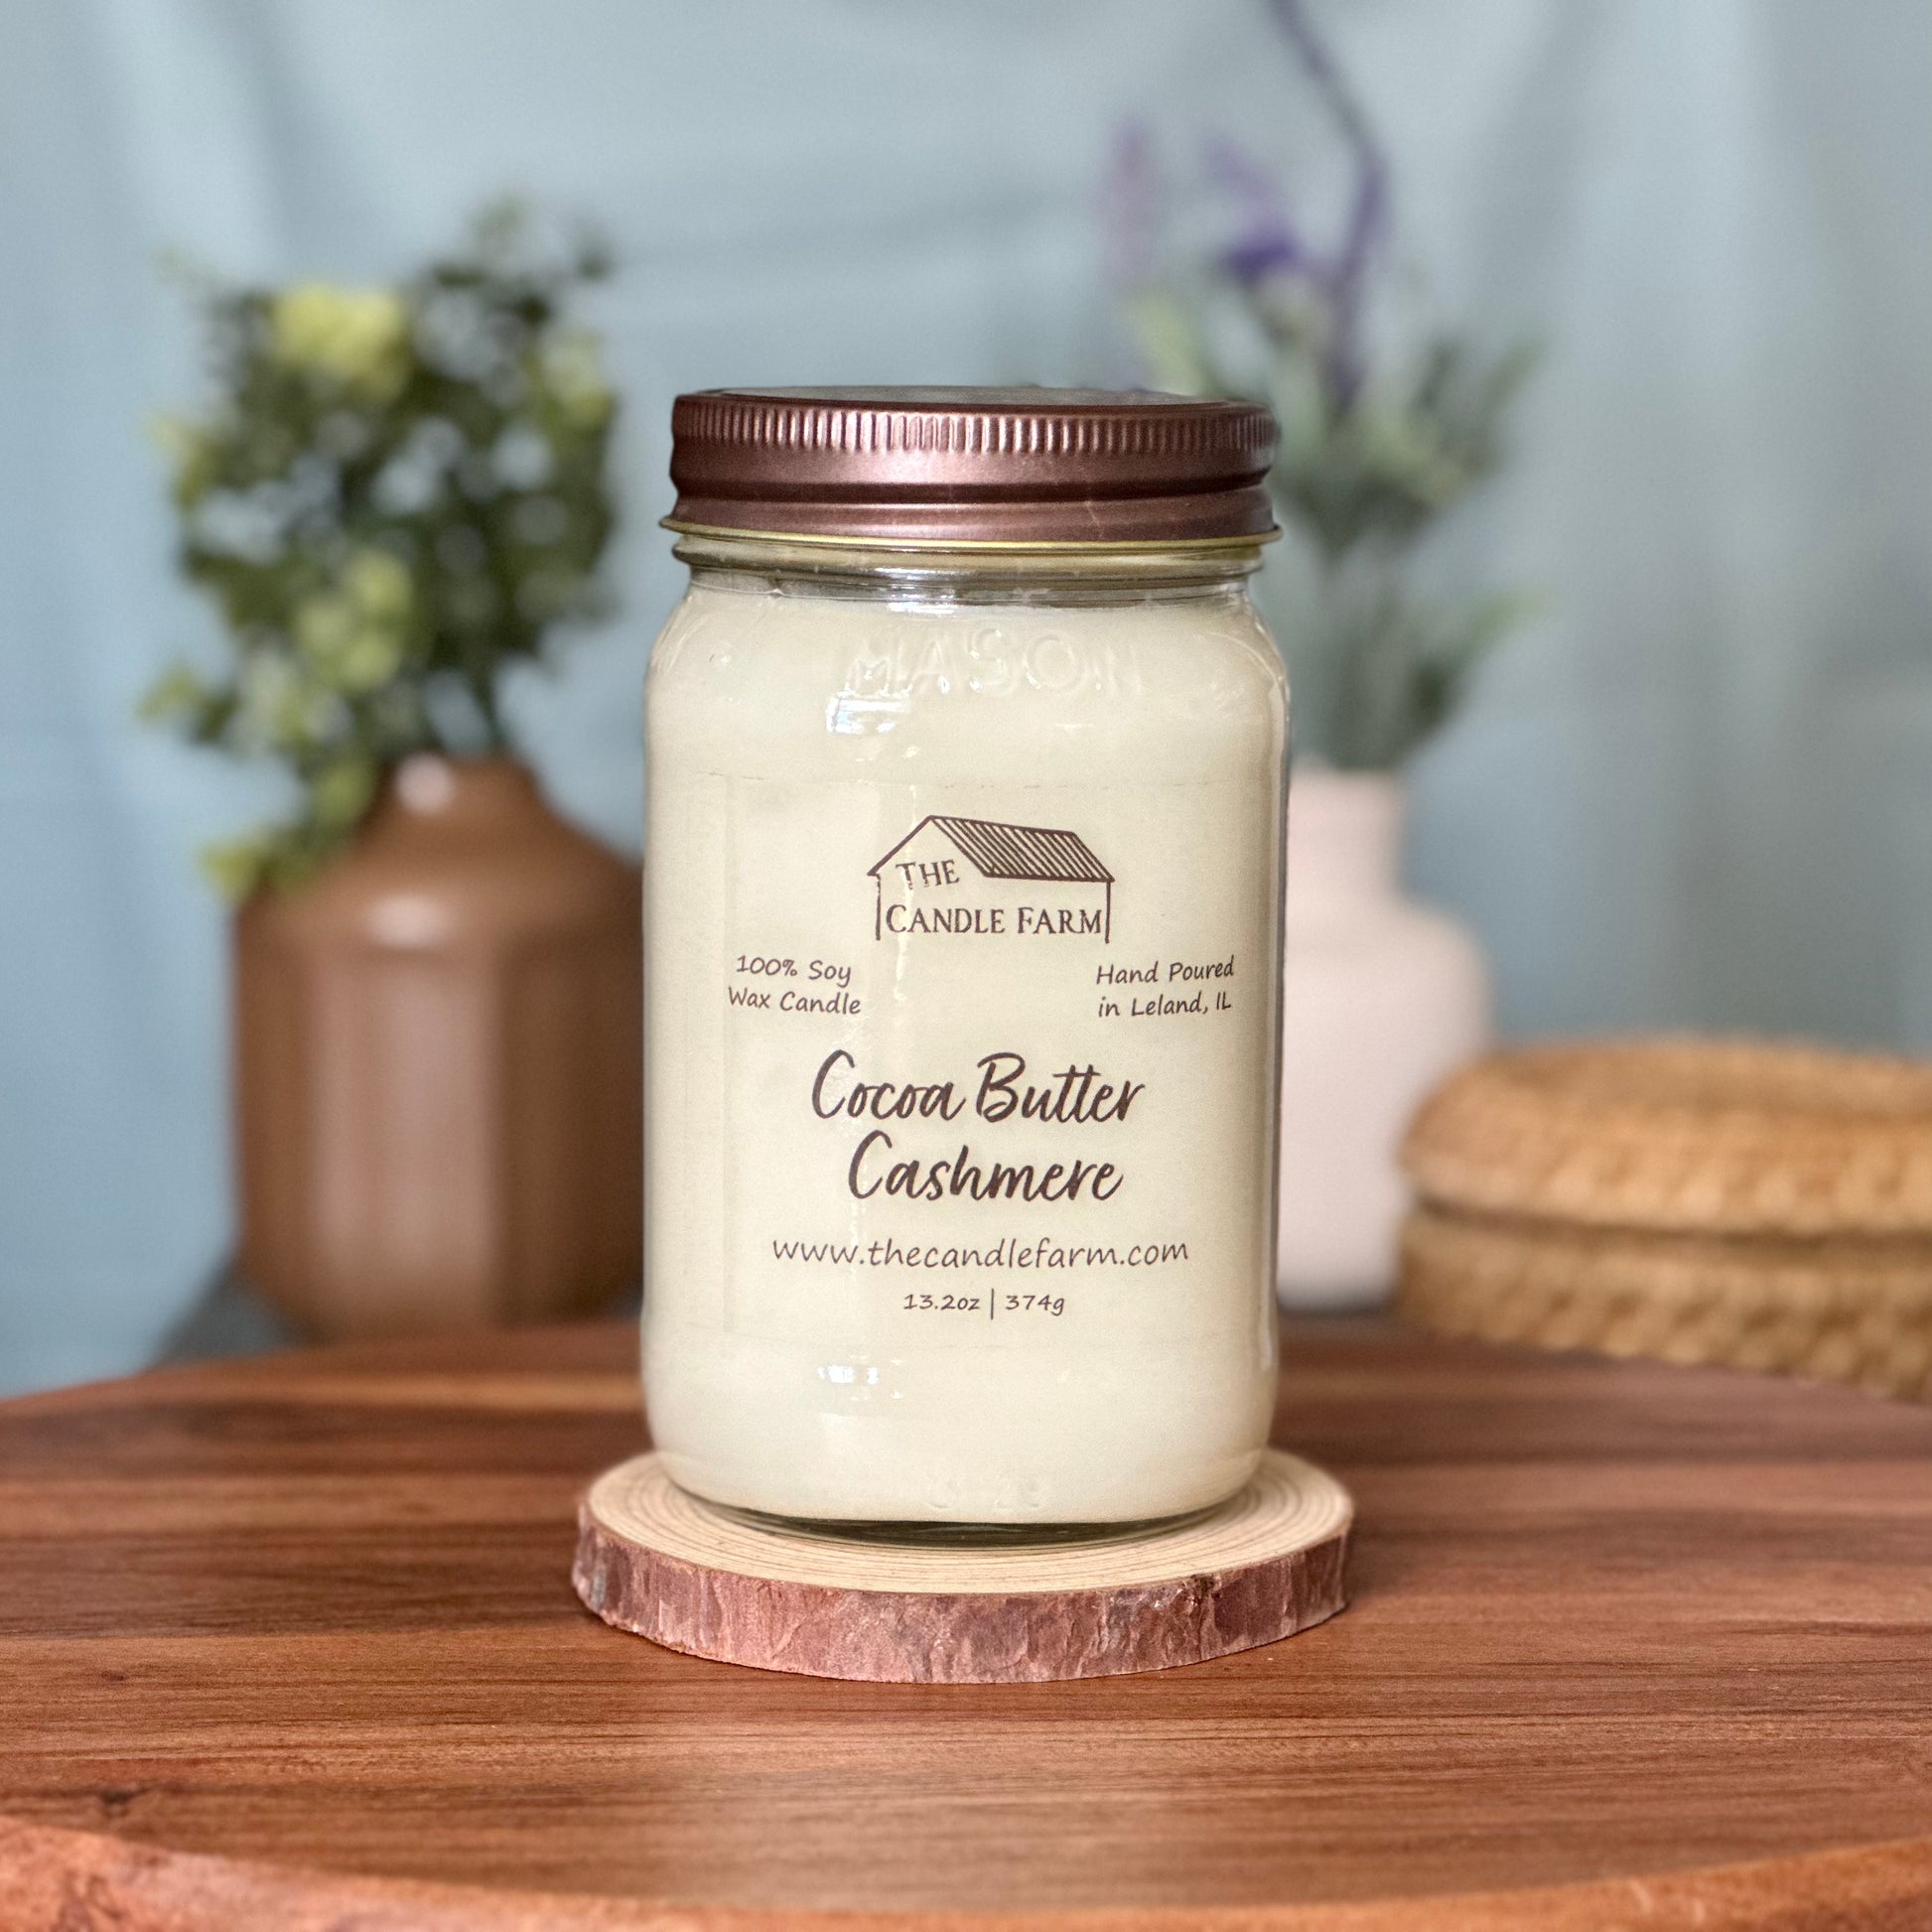 Cocoa Butter Cashmere 16 oz candle